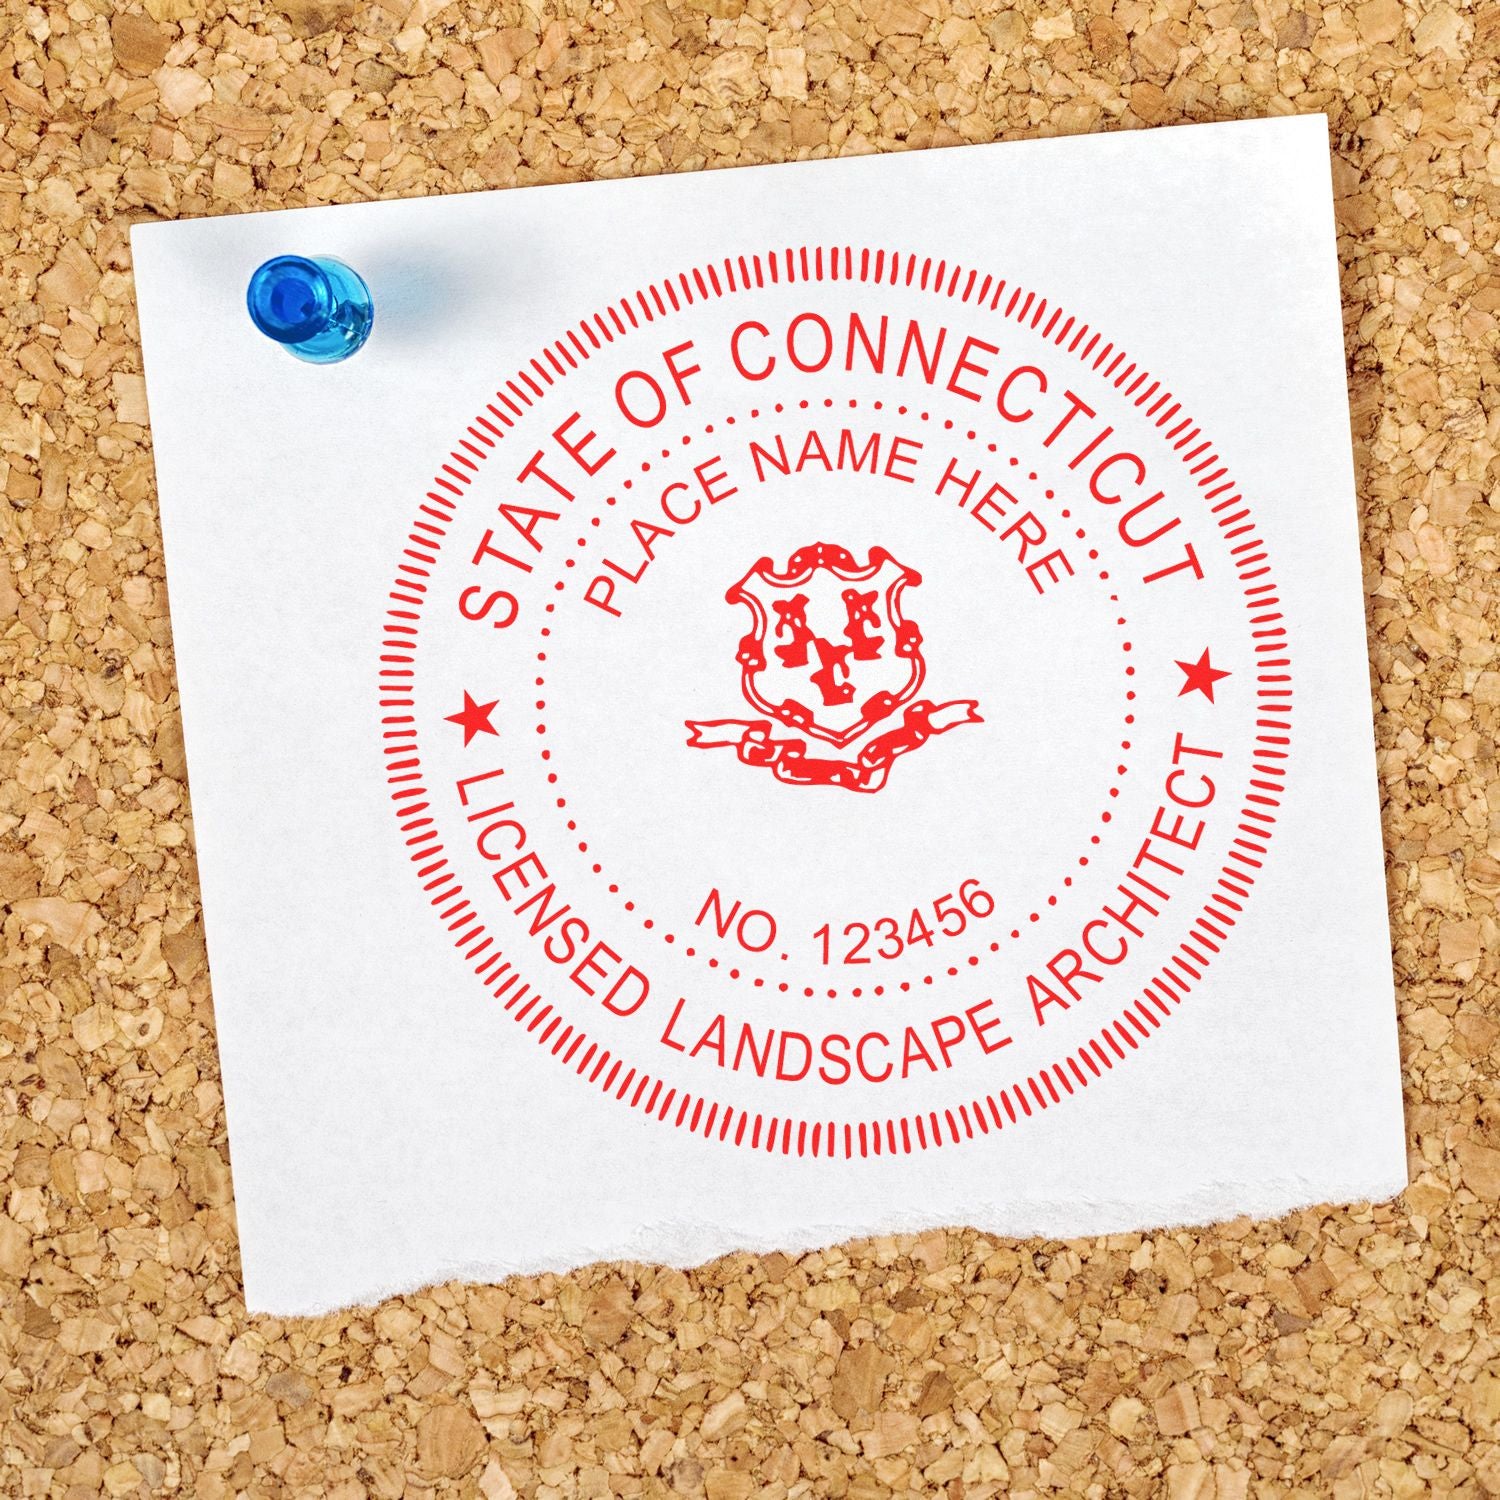 The main image for the Connecticut Landscape Architectural Seal Stamp depicting a sample of the imprint and electronic files